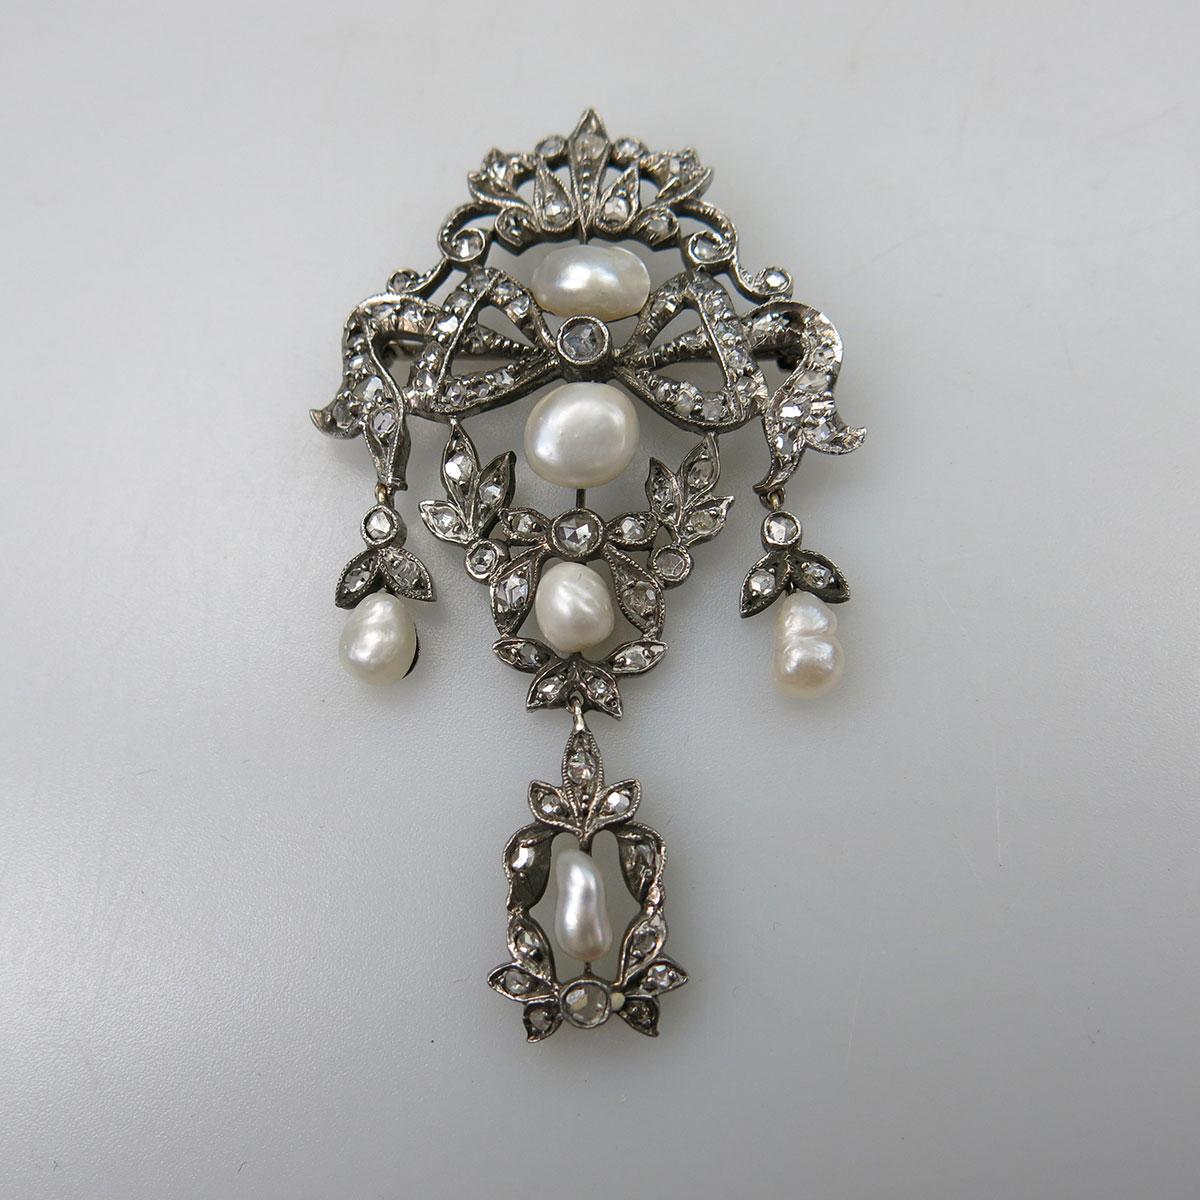 10k Gold And Silver Openwork Brooch